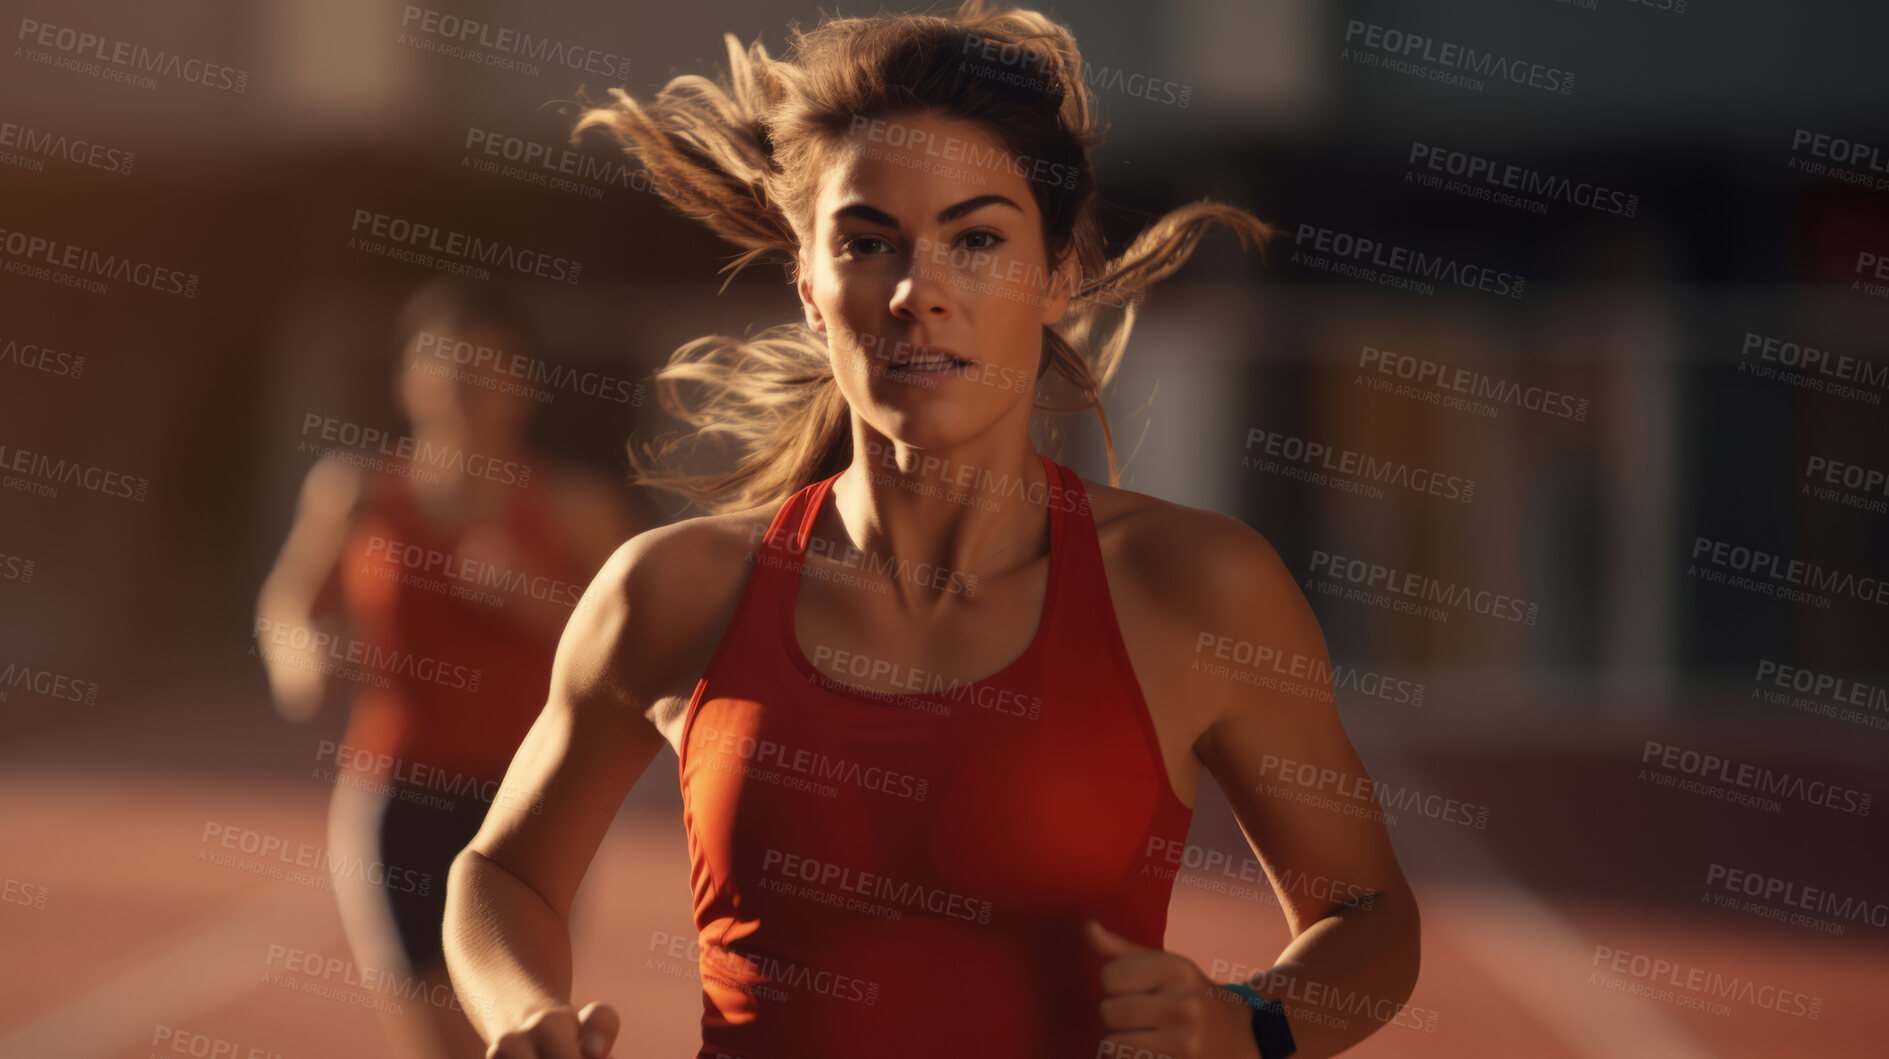 Buy stock photo Candid shot of young, fit woman running on track. Fitness, sport, runner Concept.